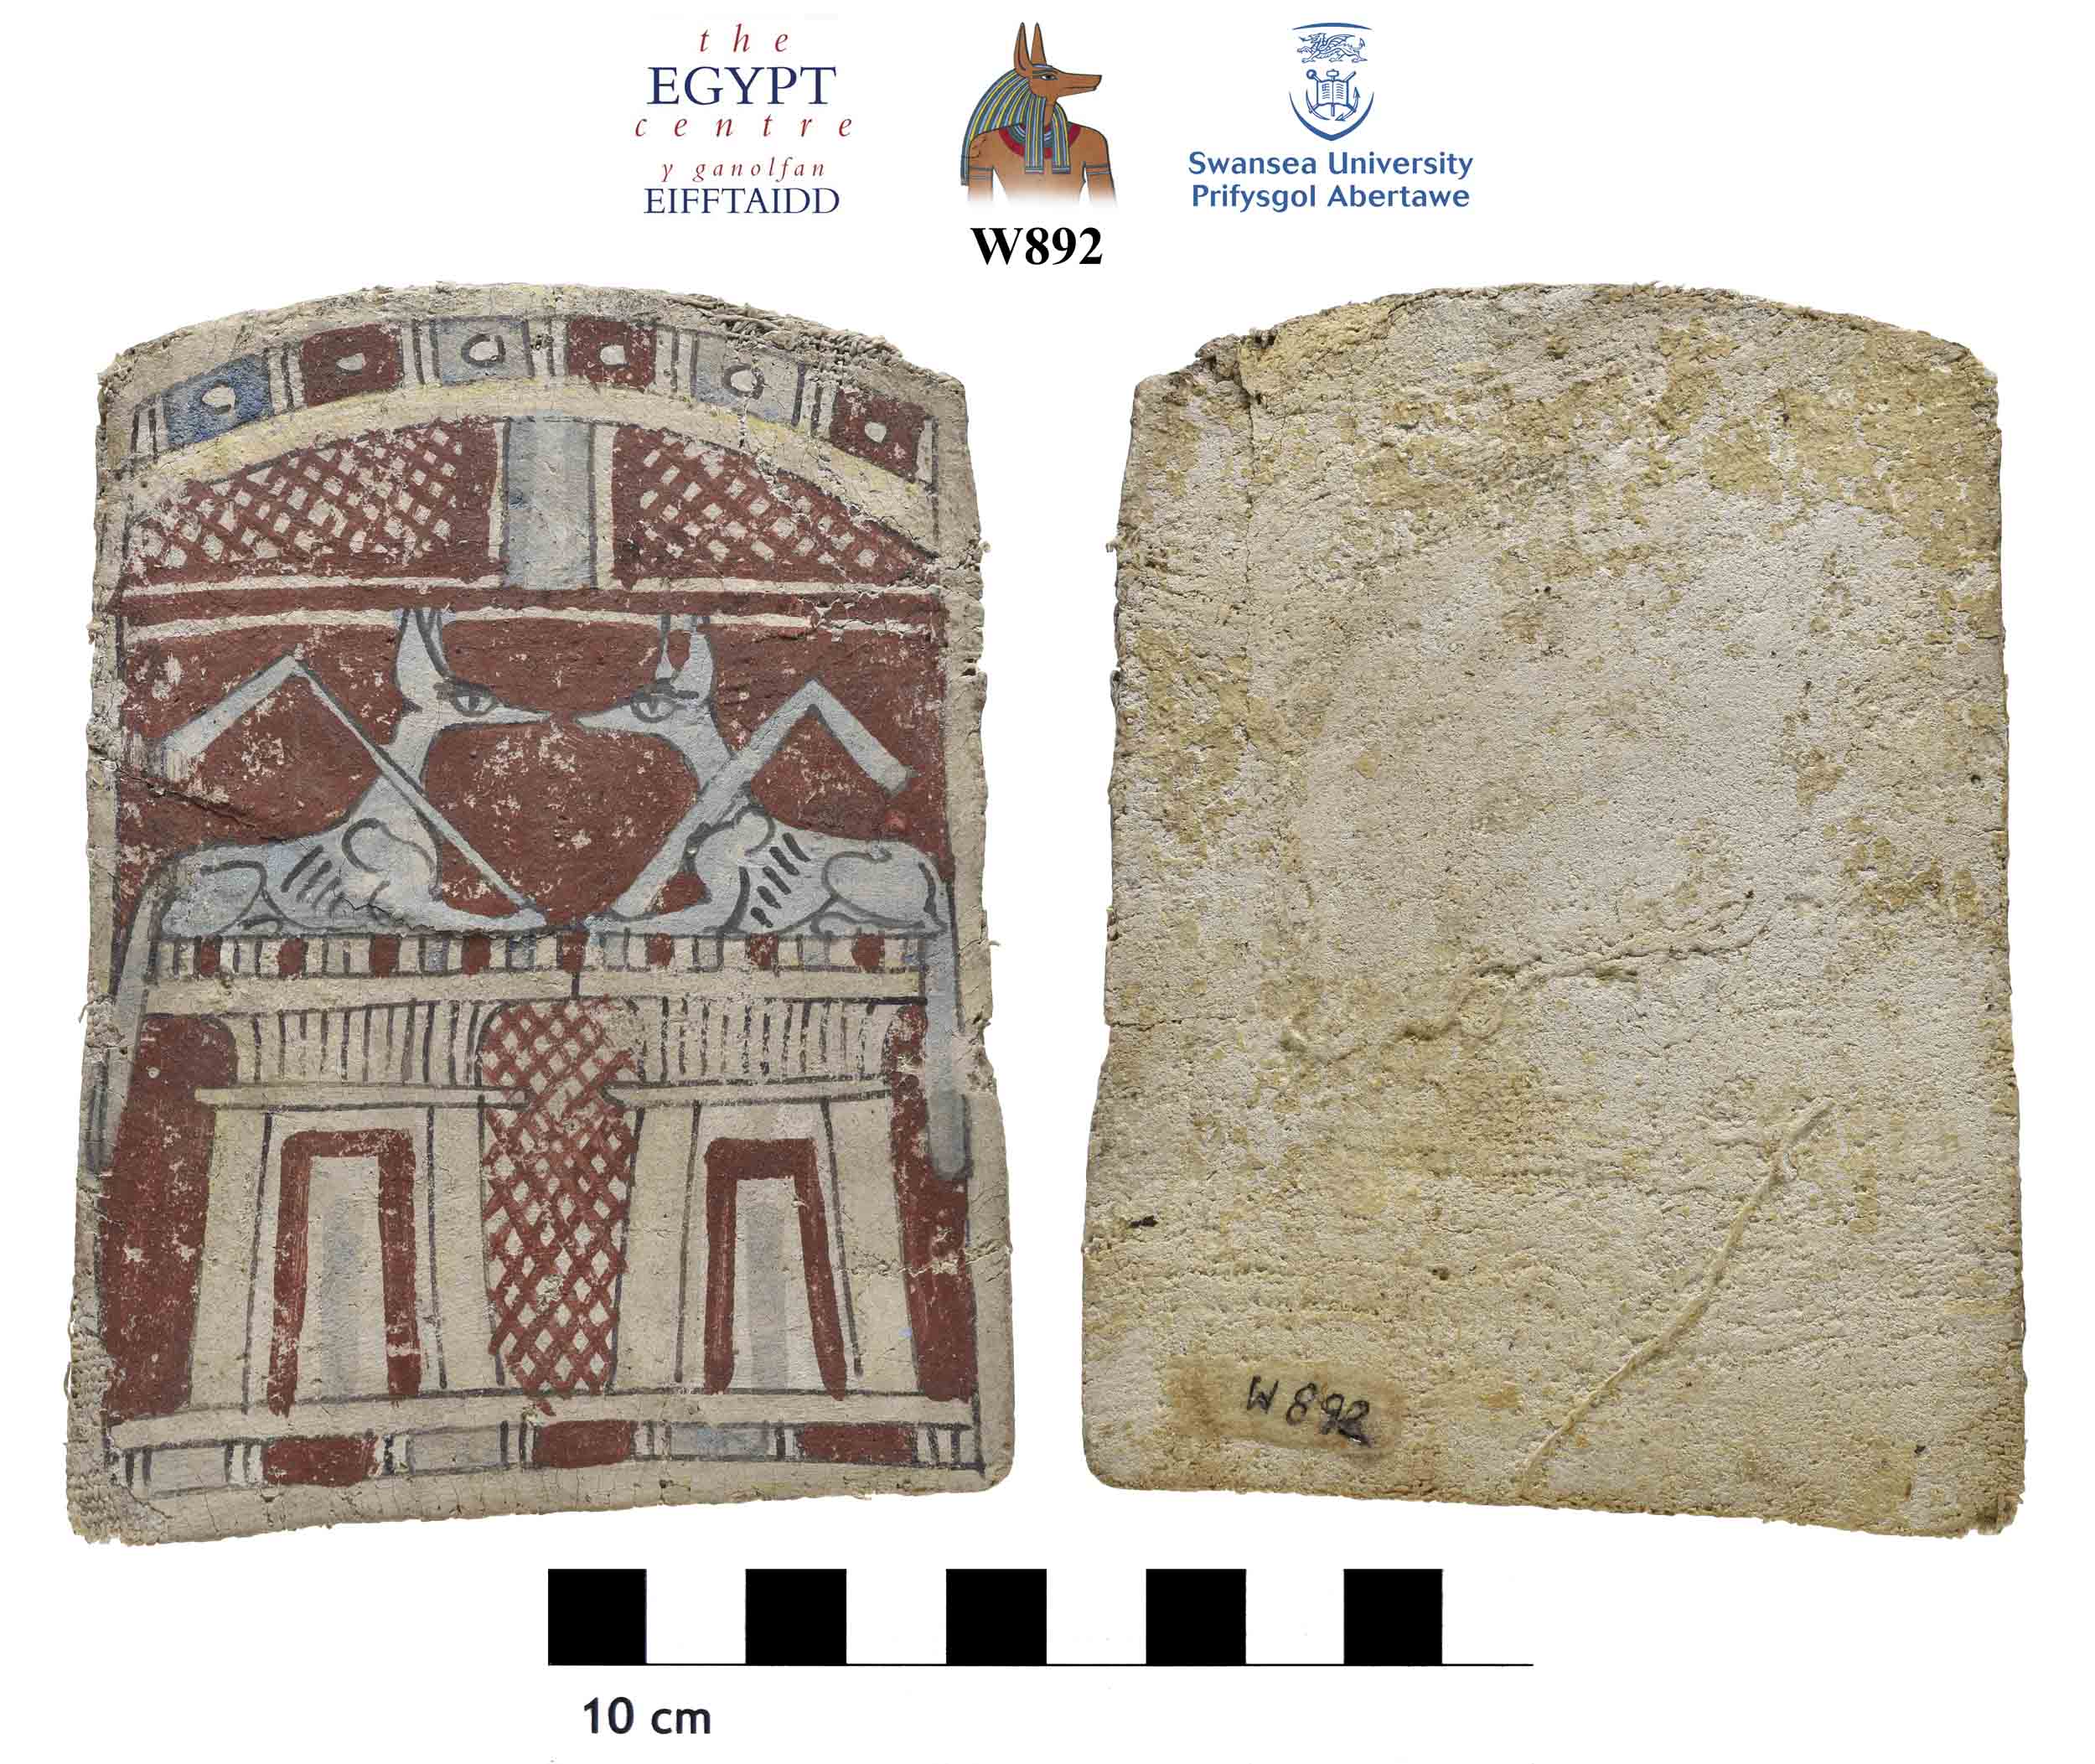 Image for: Fragment of cartonnage from a coffin